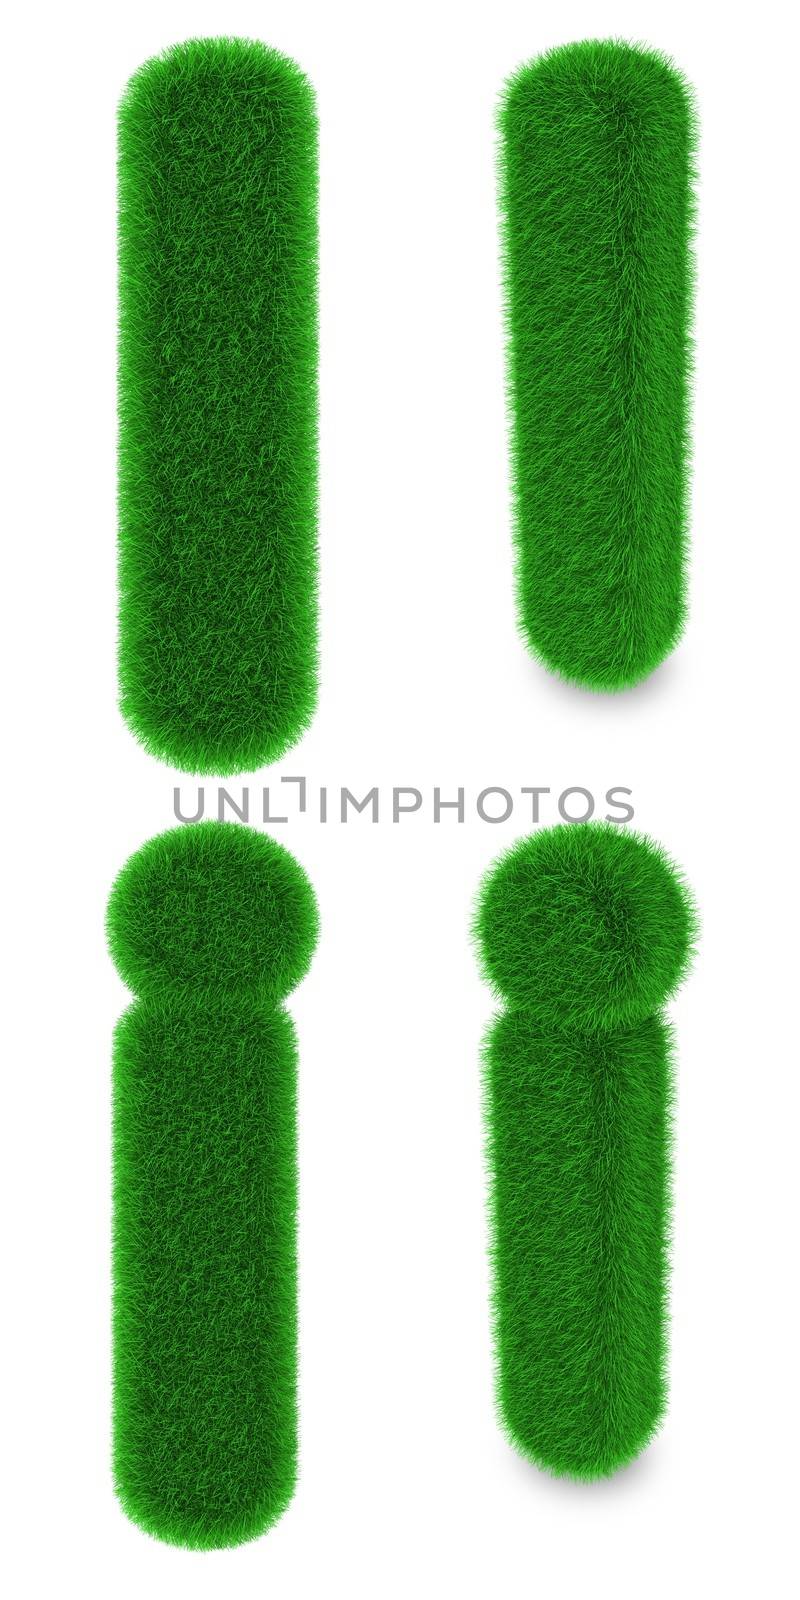 Letter I made of grass by Harvepino